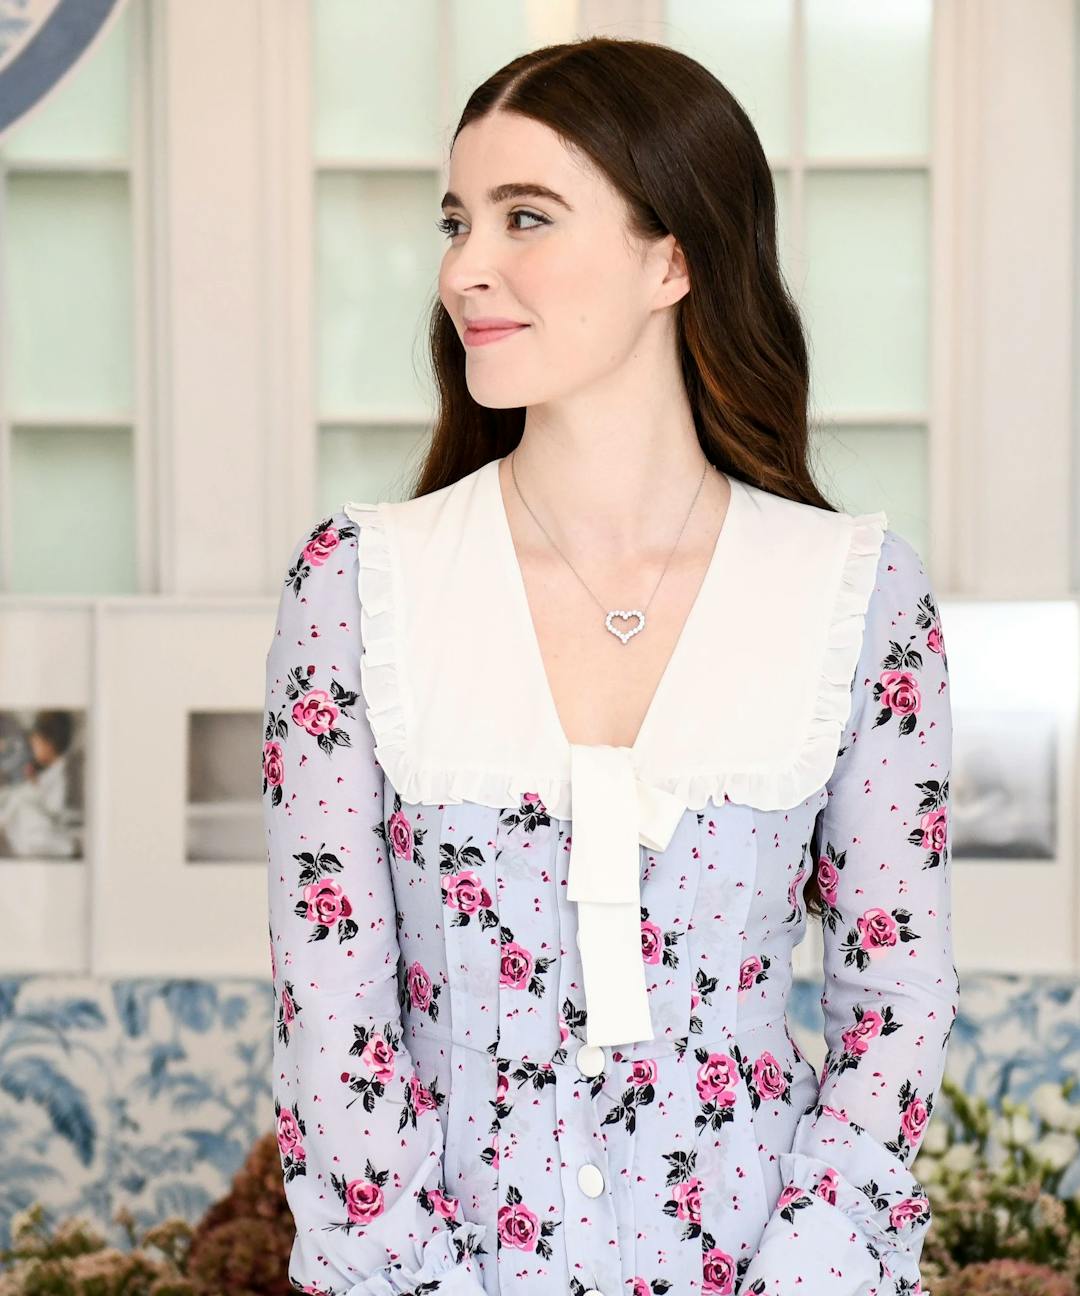 Who Is Nell Diamond, Hill House Home’s Girly Girl Founder?